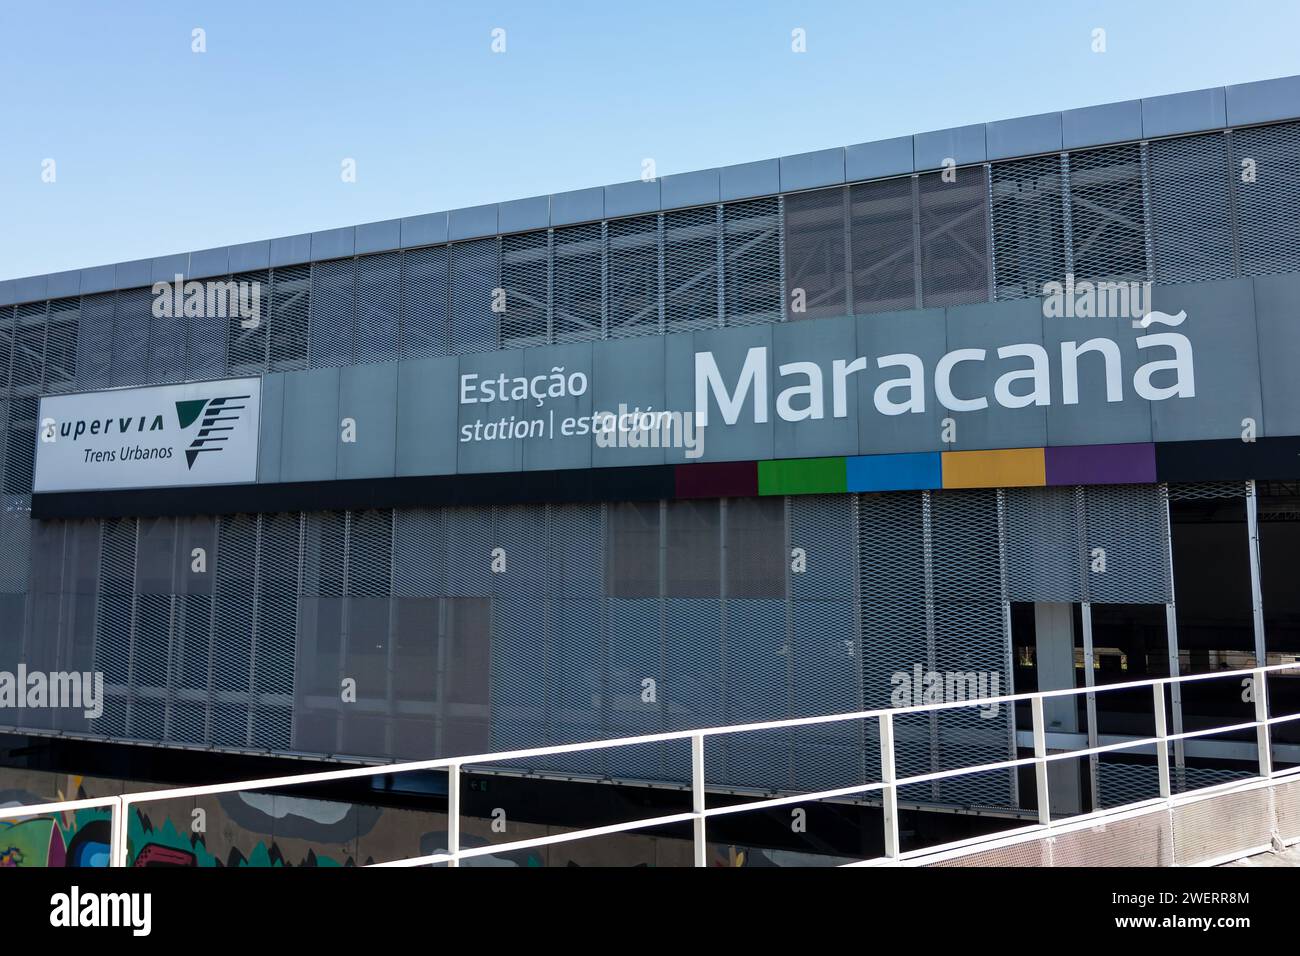 Partial view of Maracana station metal facade as saw from the station's exit pedestrian bridge in Maracana district under summer morning blue sky. Stock Photo